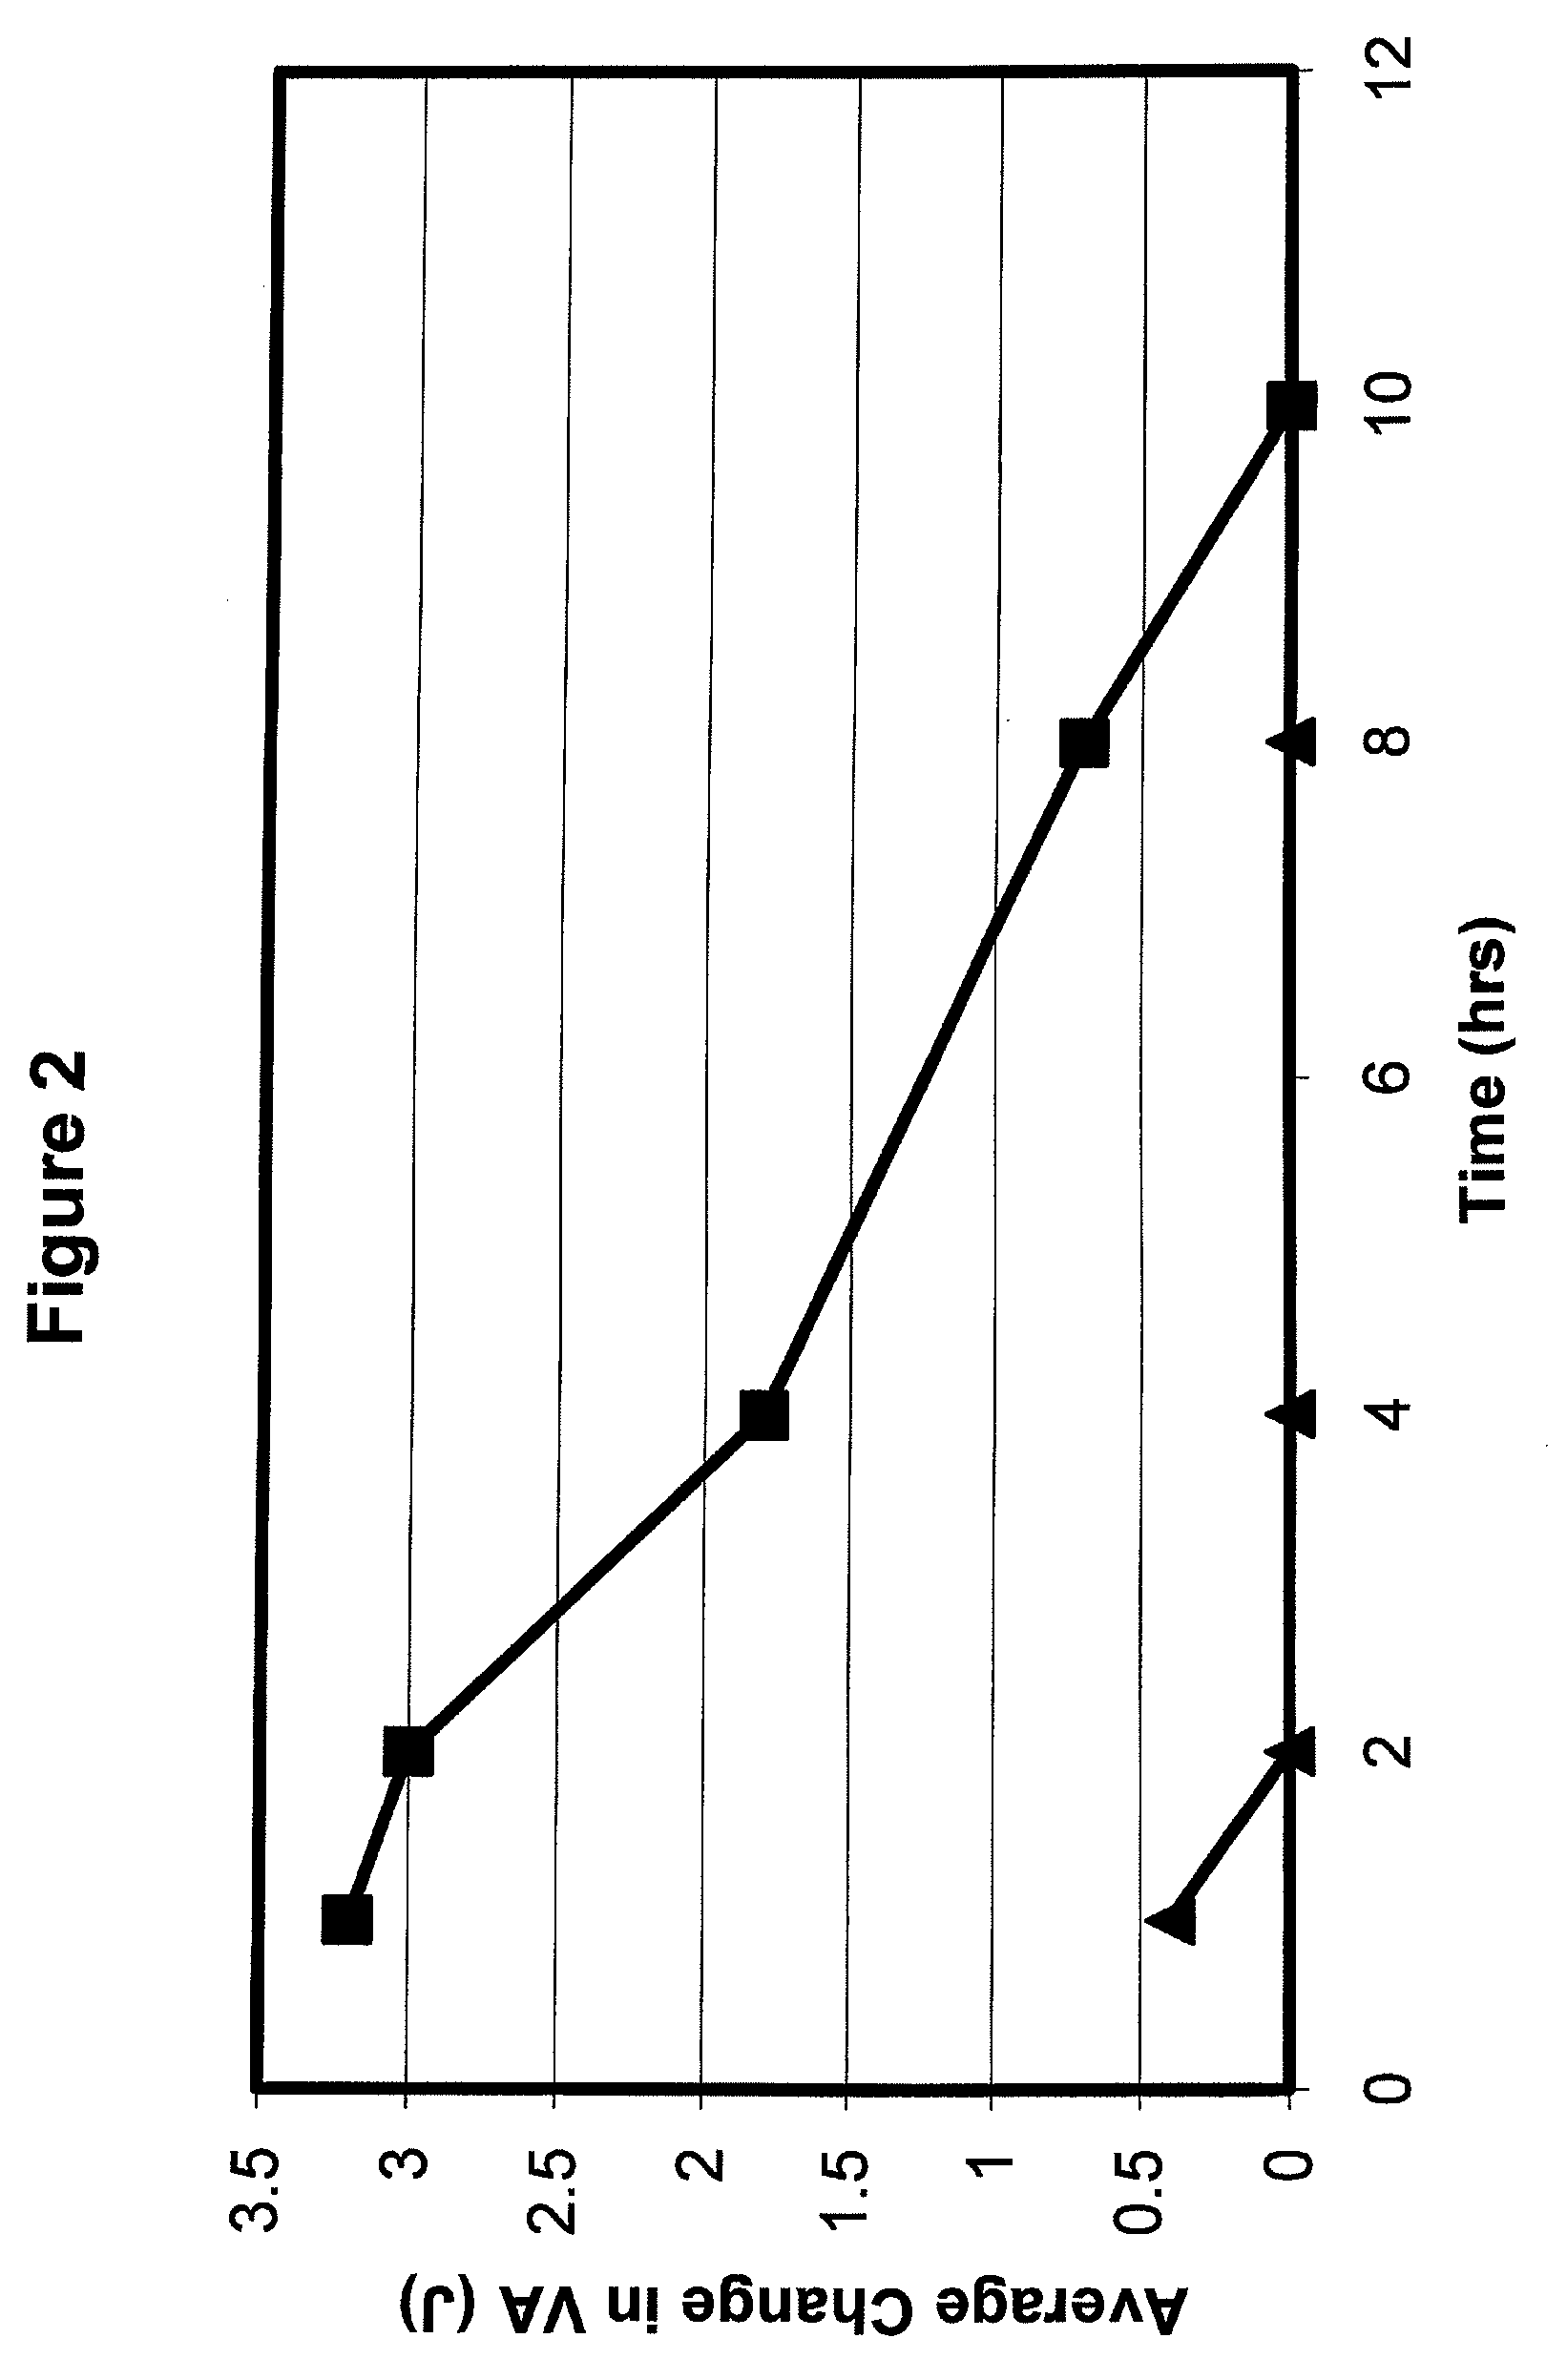 Preparations and Methods for Ameliorating or Reducing Presbyopia